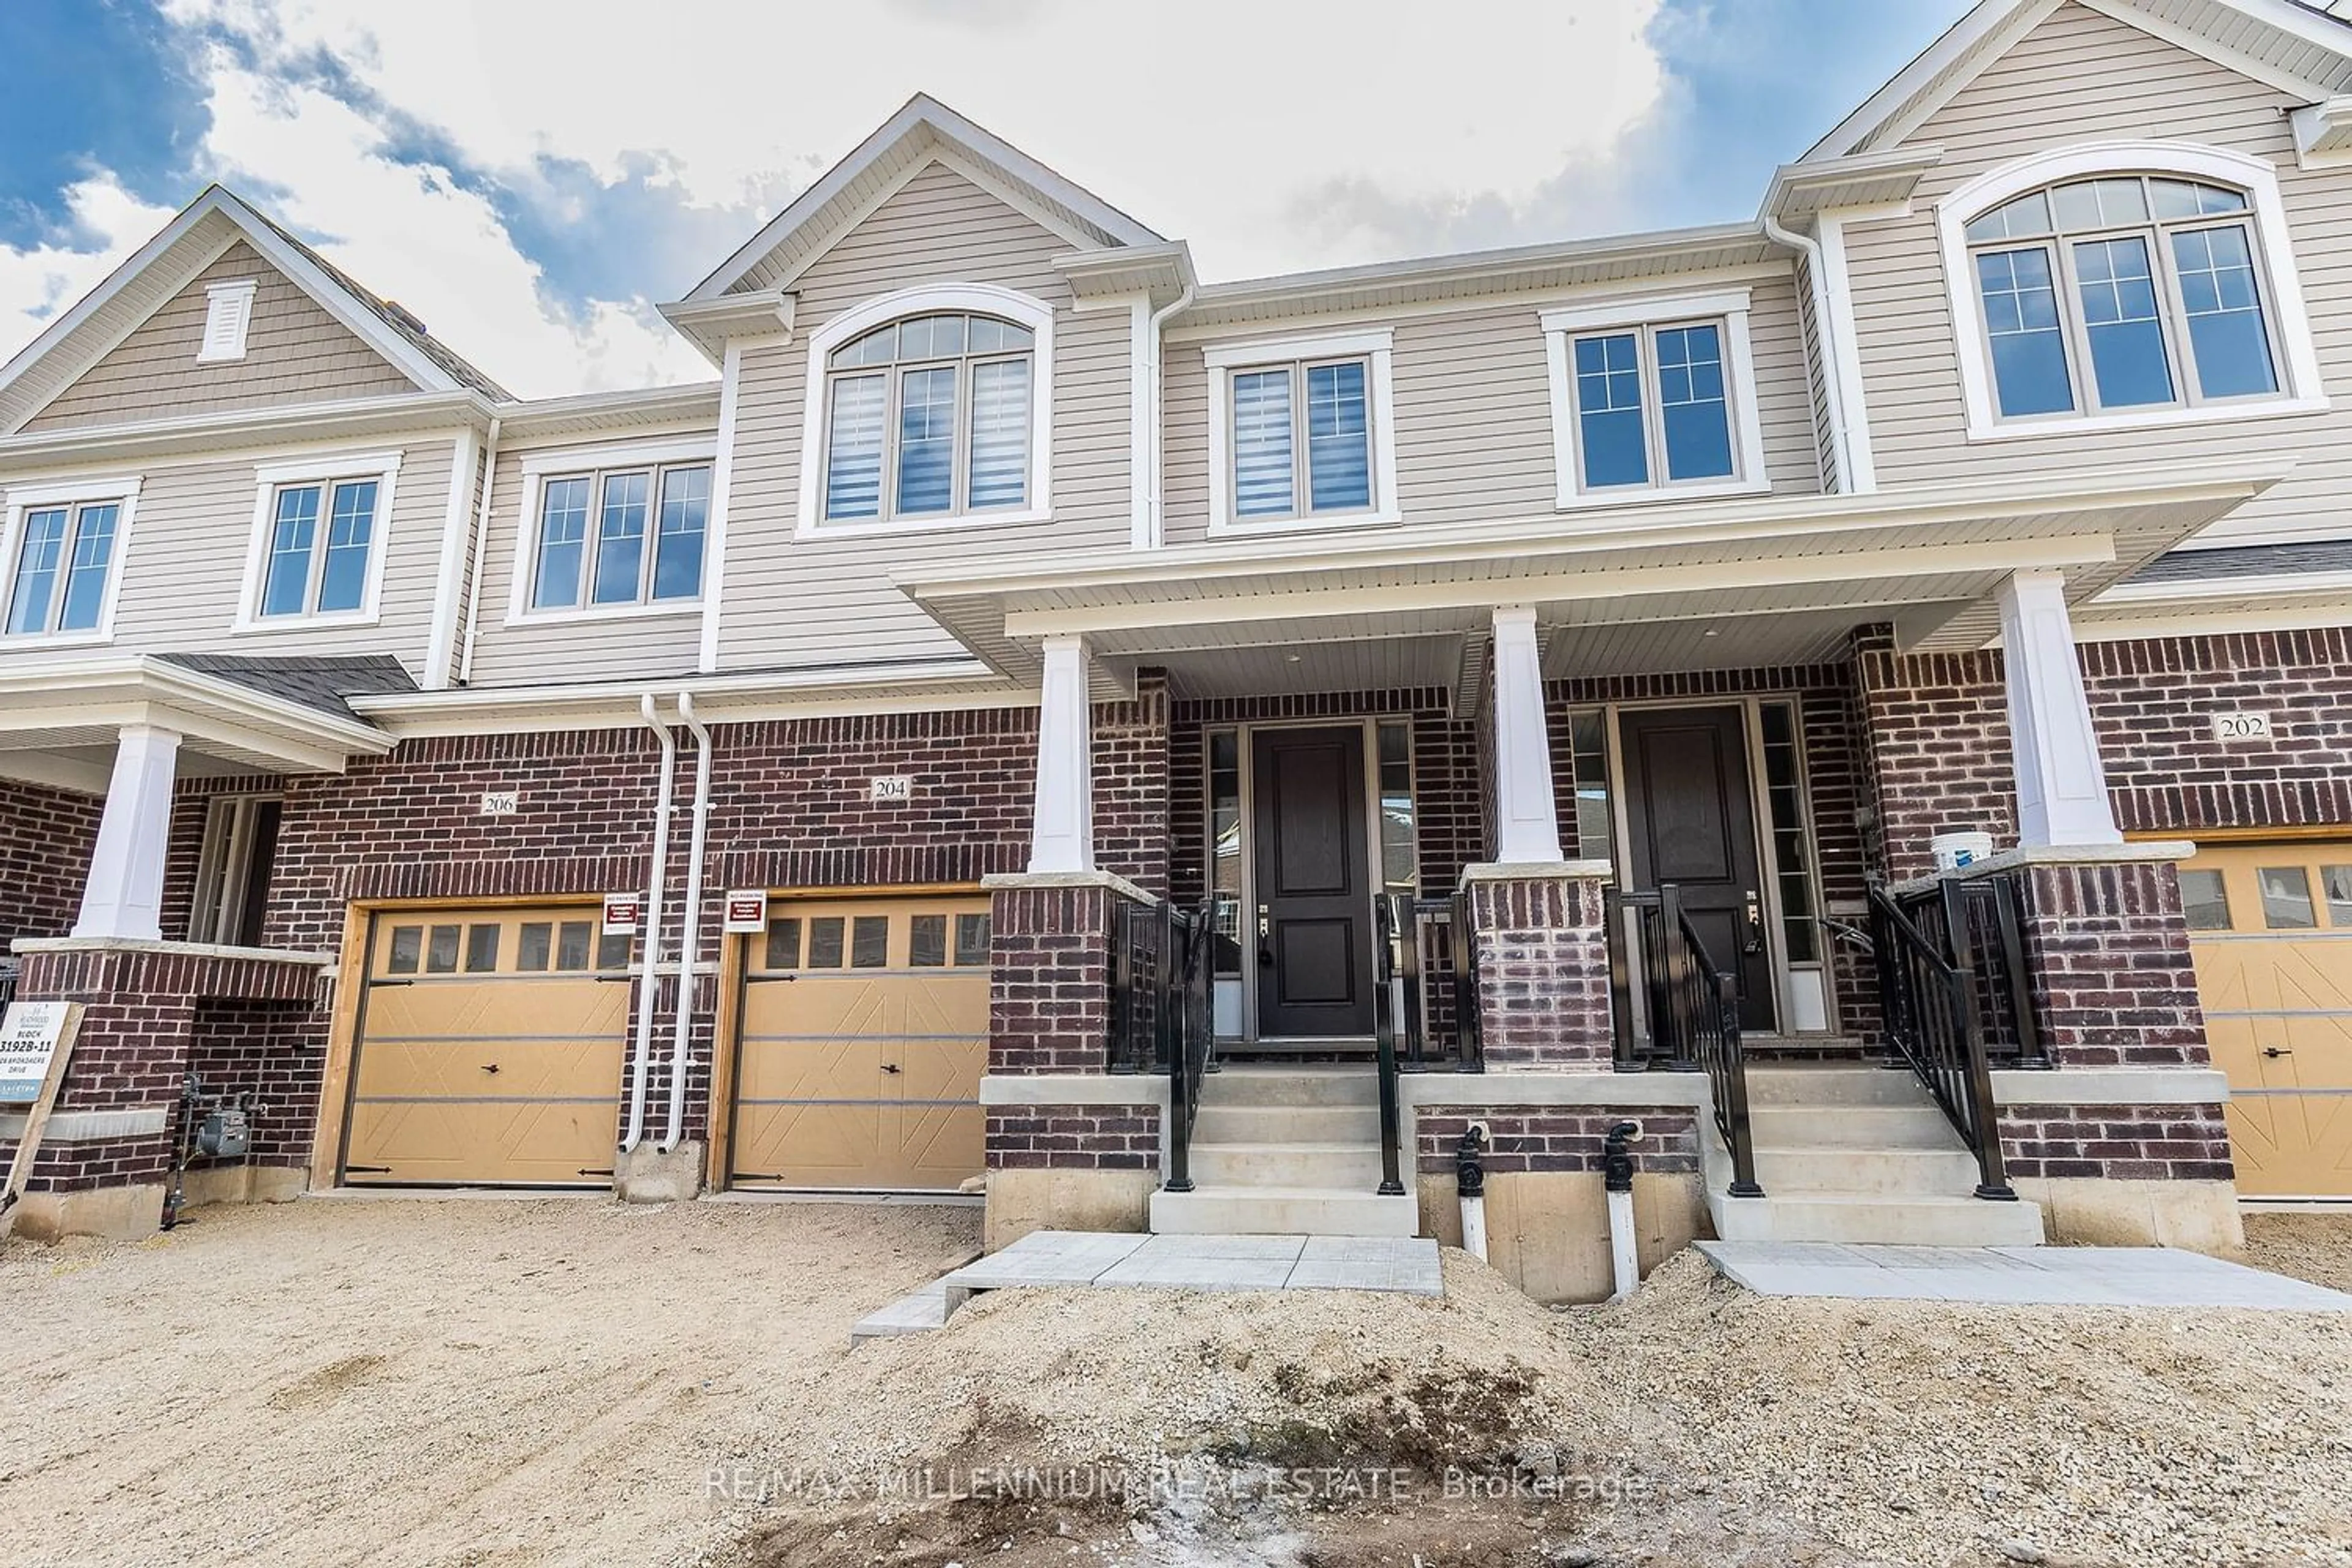 Home with brick exterior material for 204 Broadacre Dr, Kitchener Ontario N0B 2E0